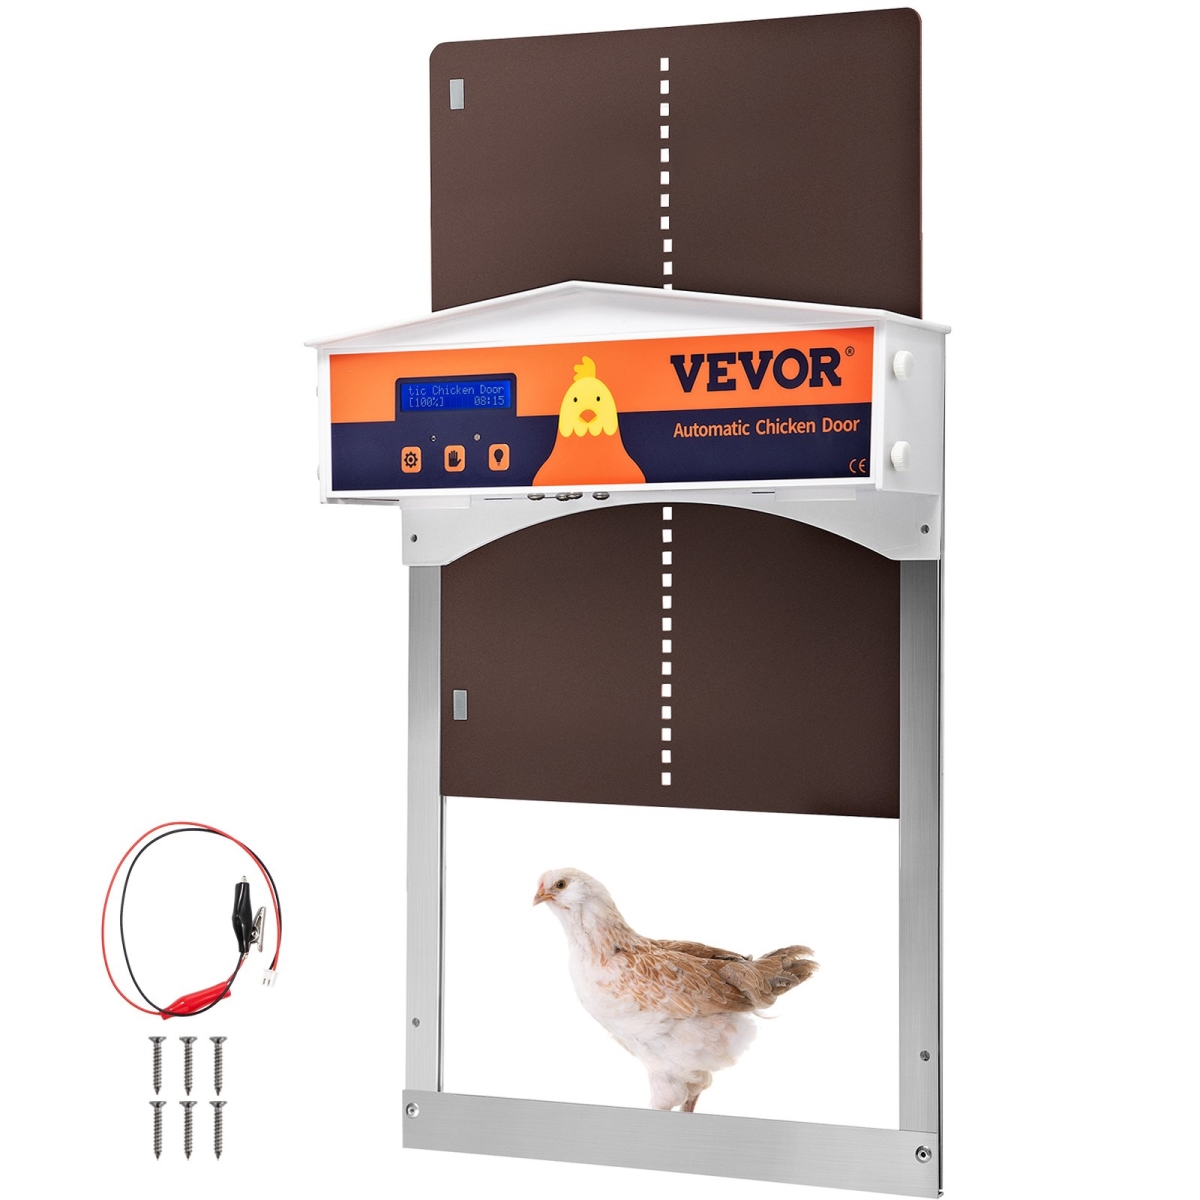 Picture of Vevor HGSJLMZHSBDDW6QRBV0 Brown Automatic Chicken Coop Door for Duck